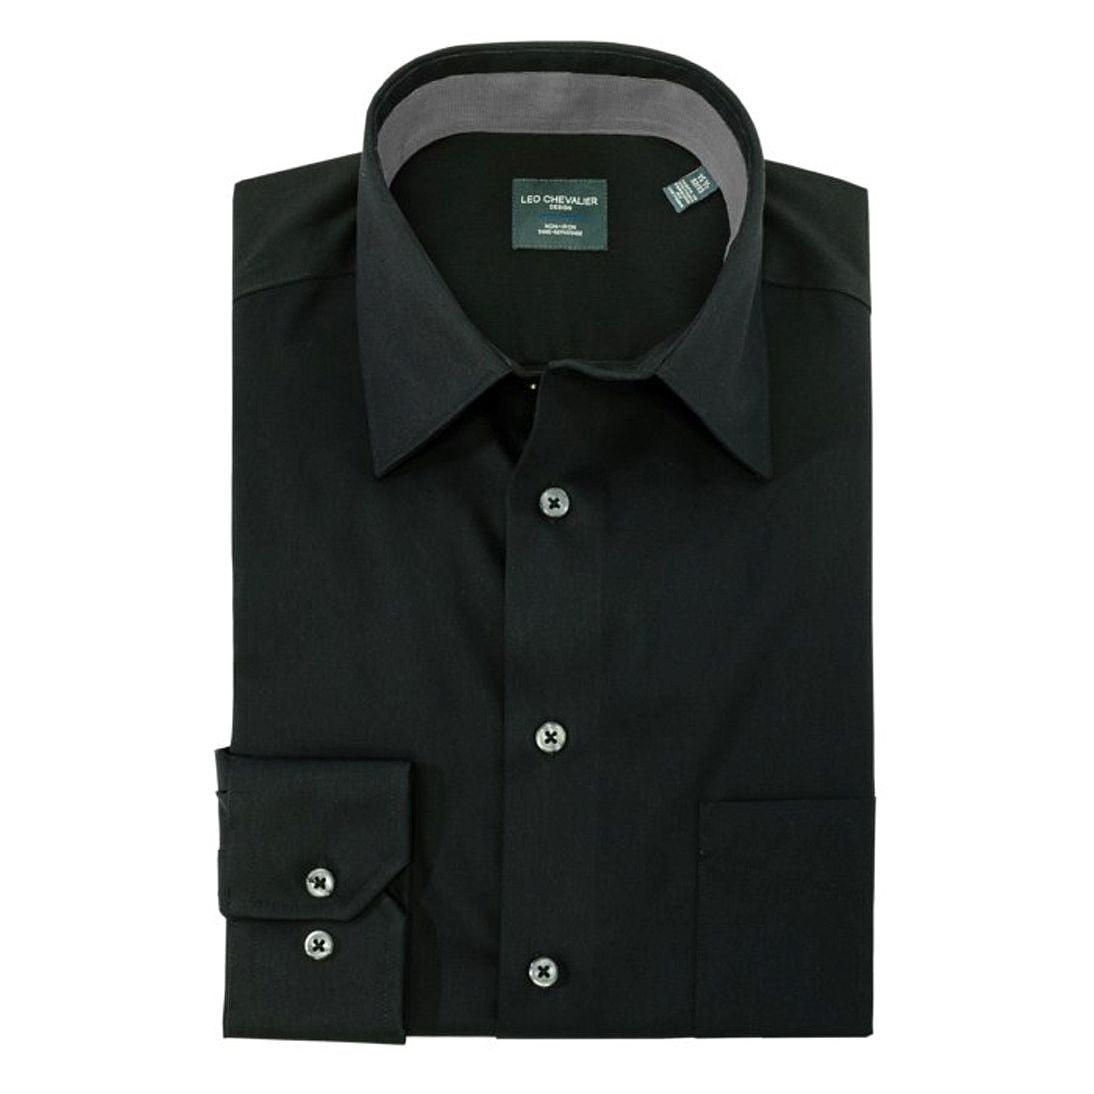 No-Iron Cotton Dress Shirt with Spread Collar in Black (Regular Fit) by Leo Chevalier